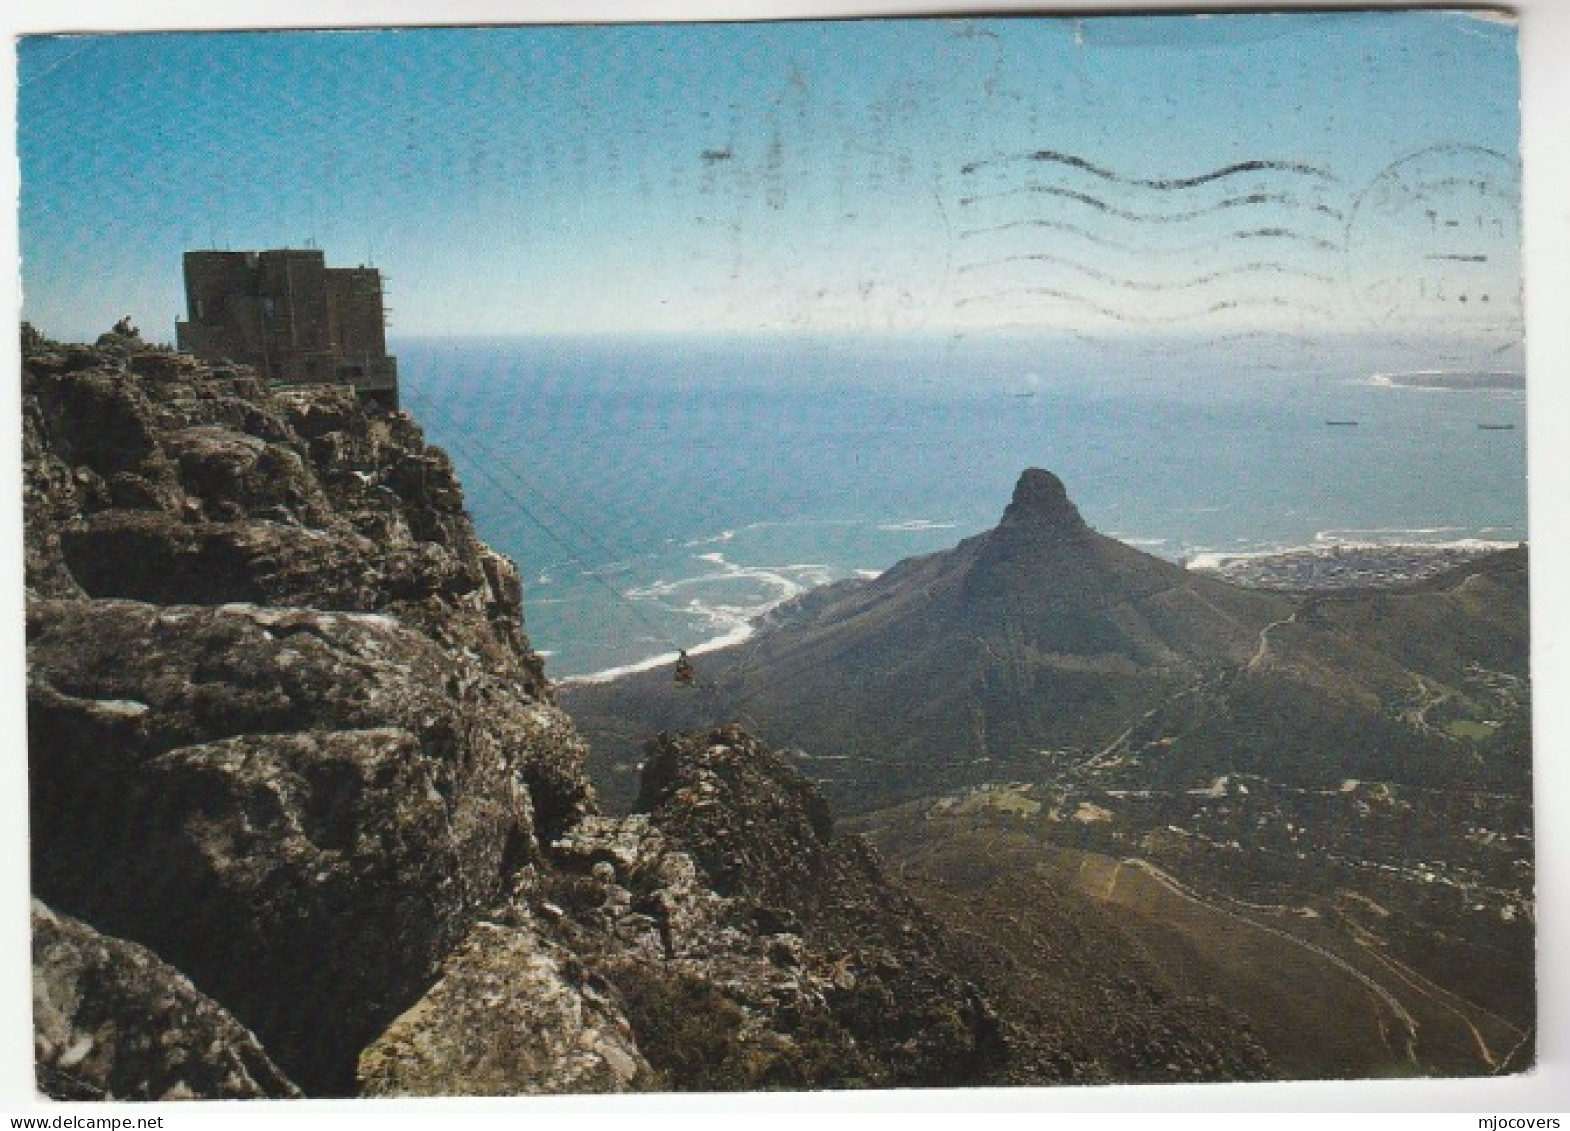 SOUTH AFRICA Postcard UPPER CABLEWAY STATION Mountain Cover Cape To Saudi Arabia Stamps Slogan Save Litre Write Letter - South Africa